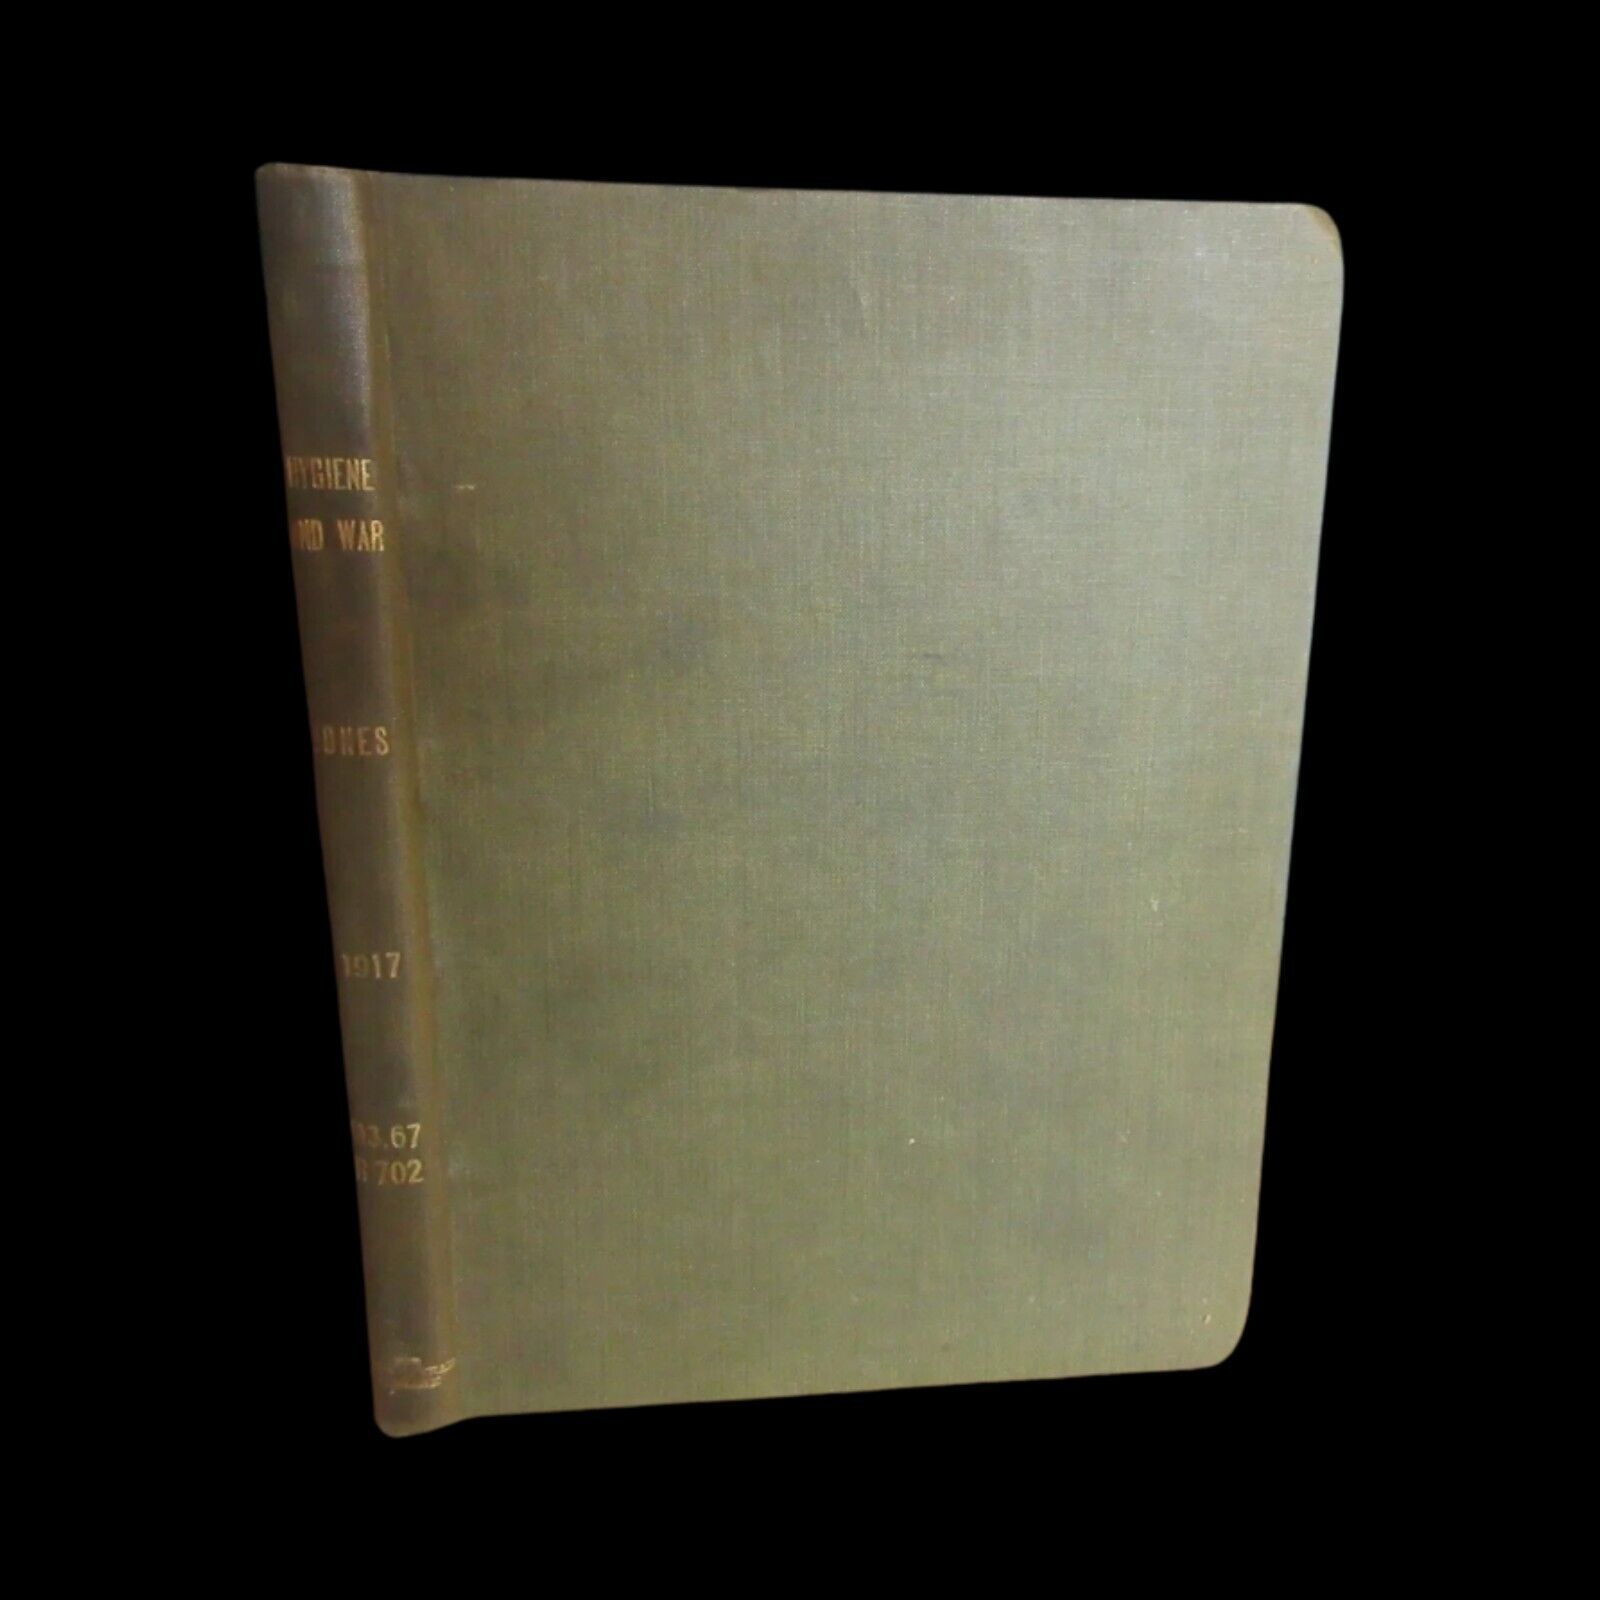 Old HYGIENE AND WAR Book 1917 WWI MEDICAL DISEASE WOUND DOCTOR ARMY SURGERY PAIN